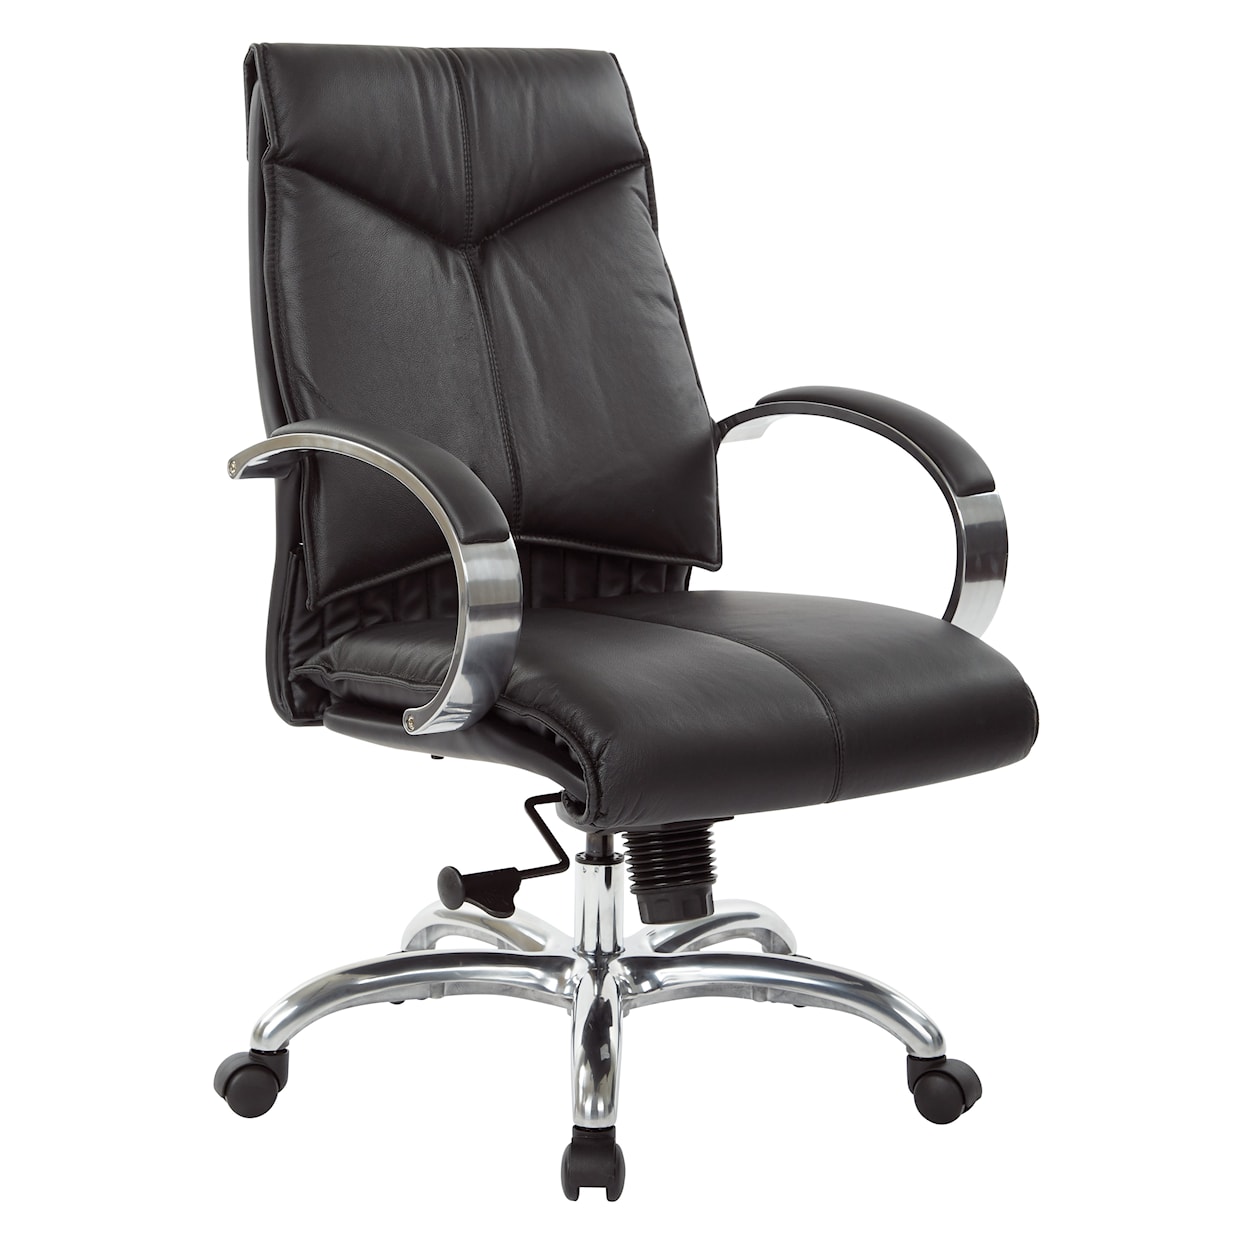 Office Star 8200 Series Office Chair